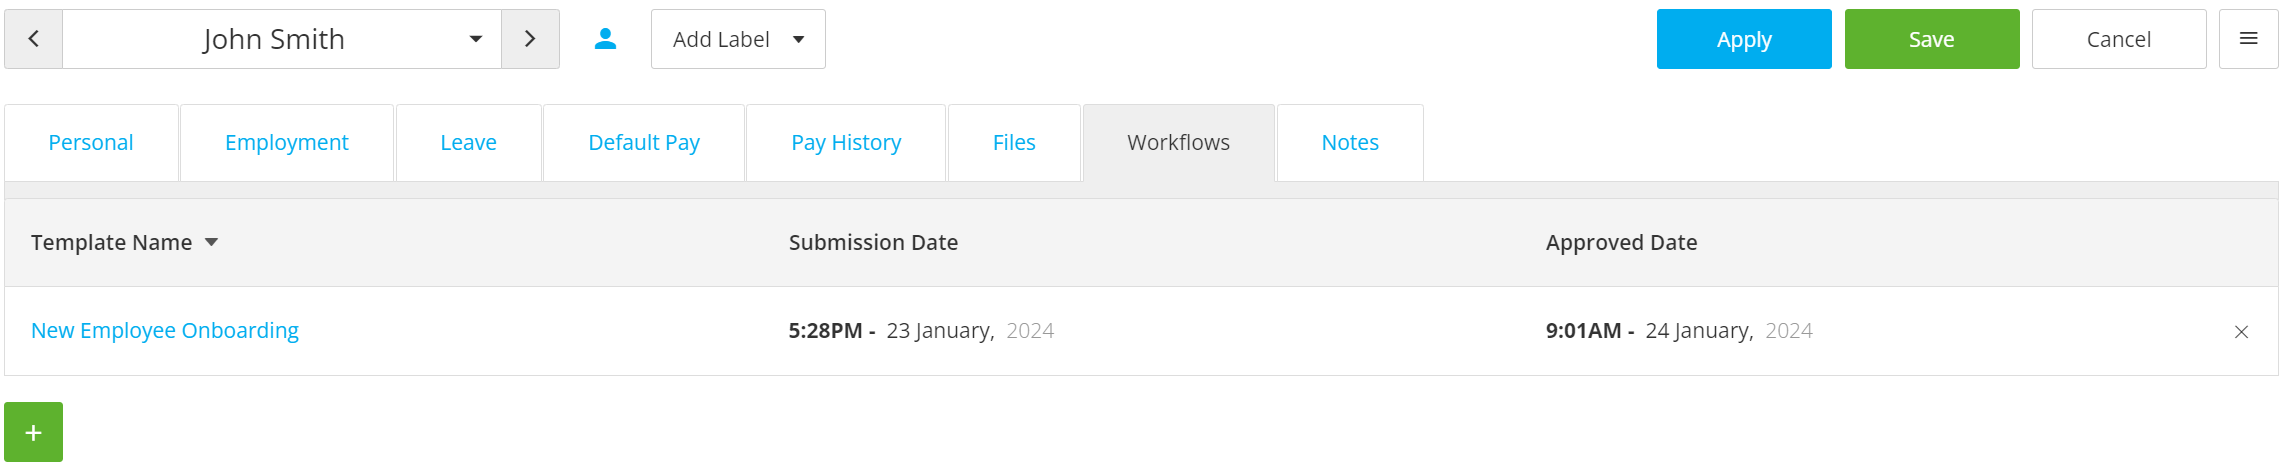 Employees - Workflows - Complete Workflow.png